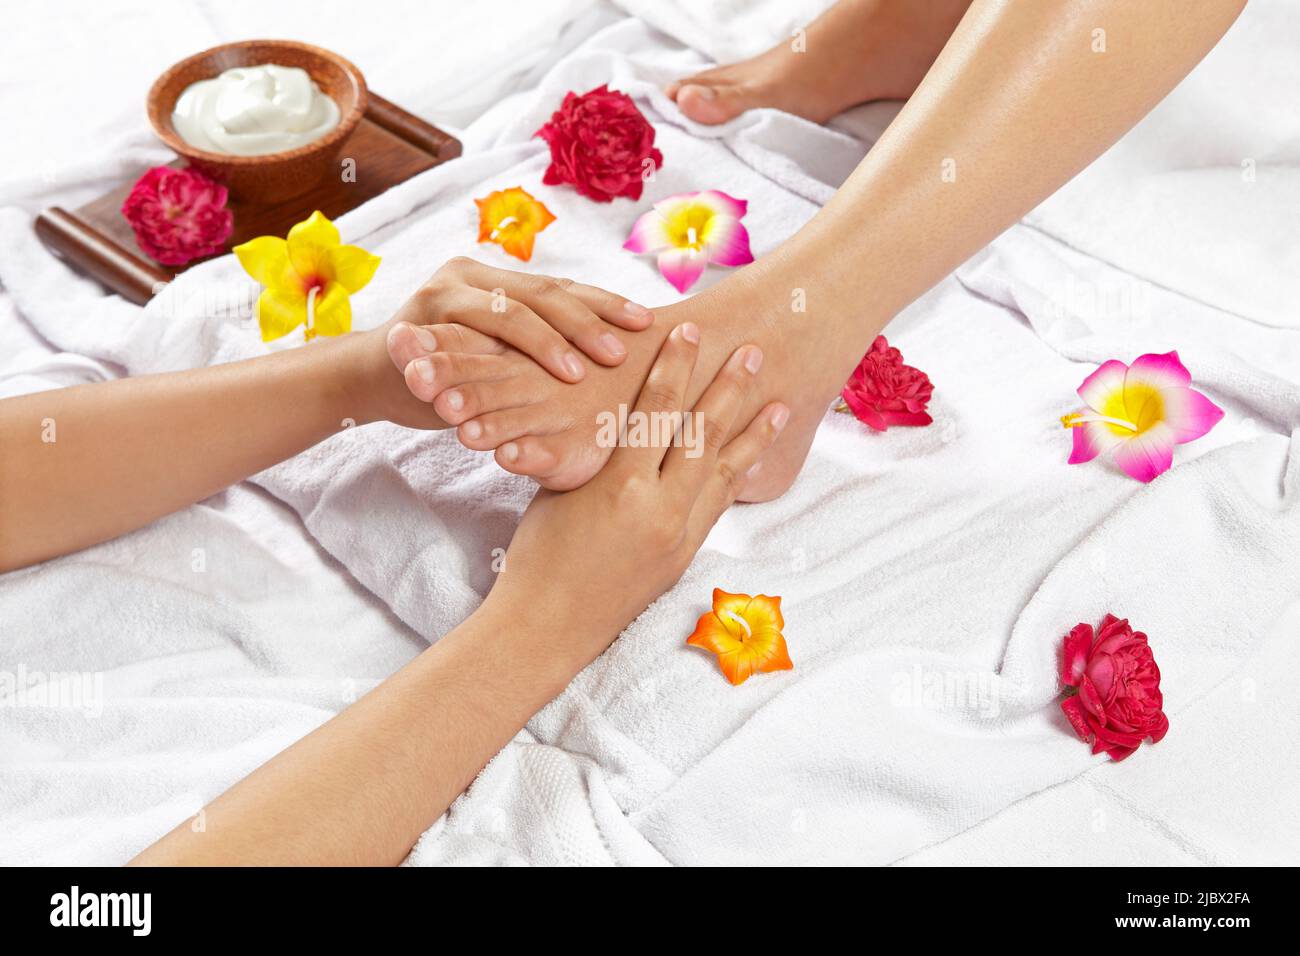 the therapist's hand doing therapy by massaging the feet Stock Photo